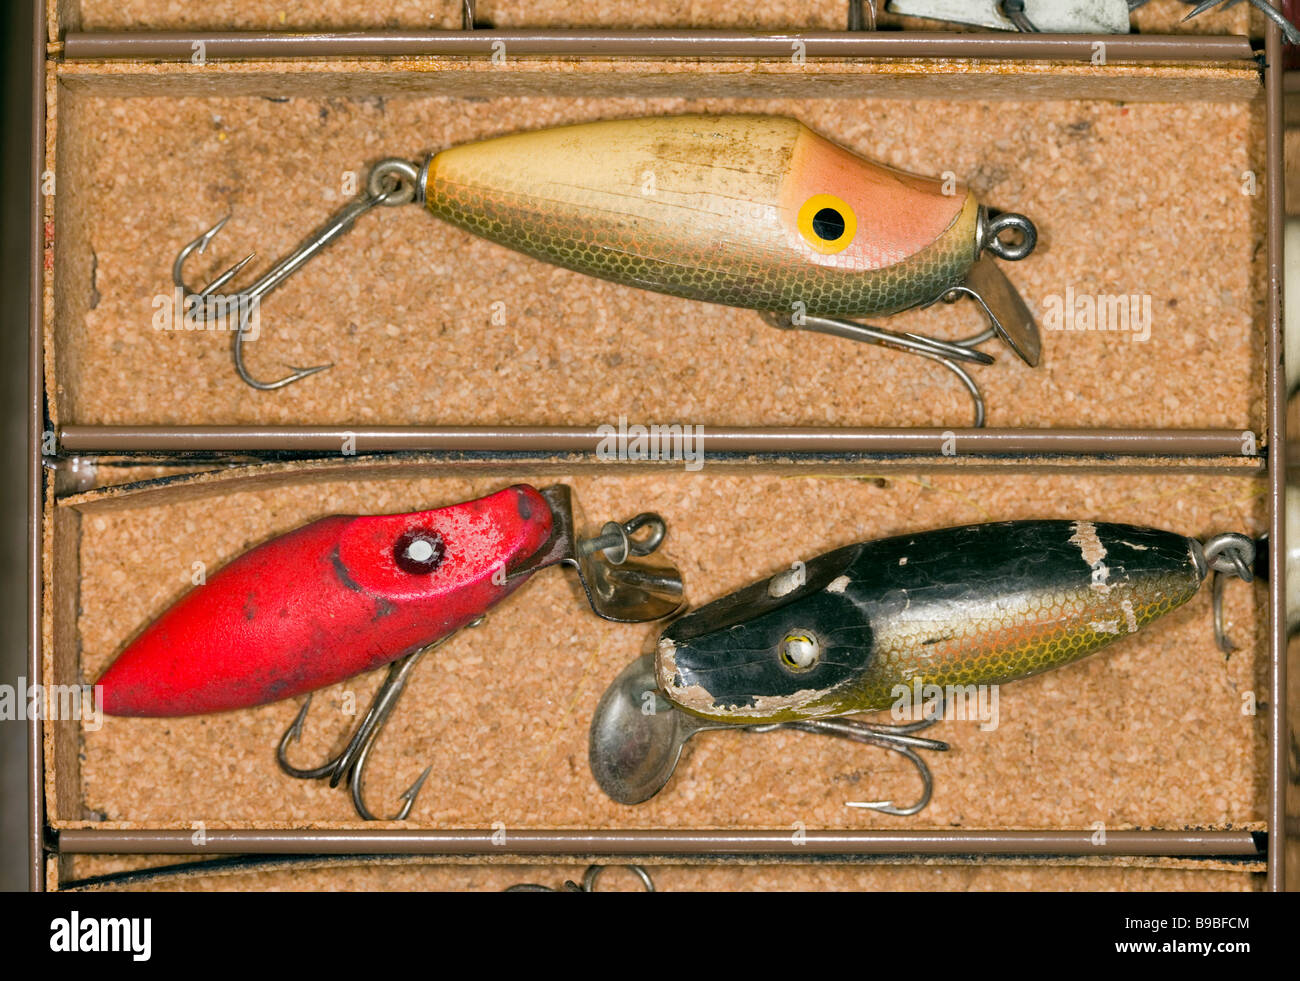 Three fishing lures in a tackle box Stock Photo - Alamy